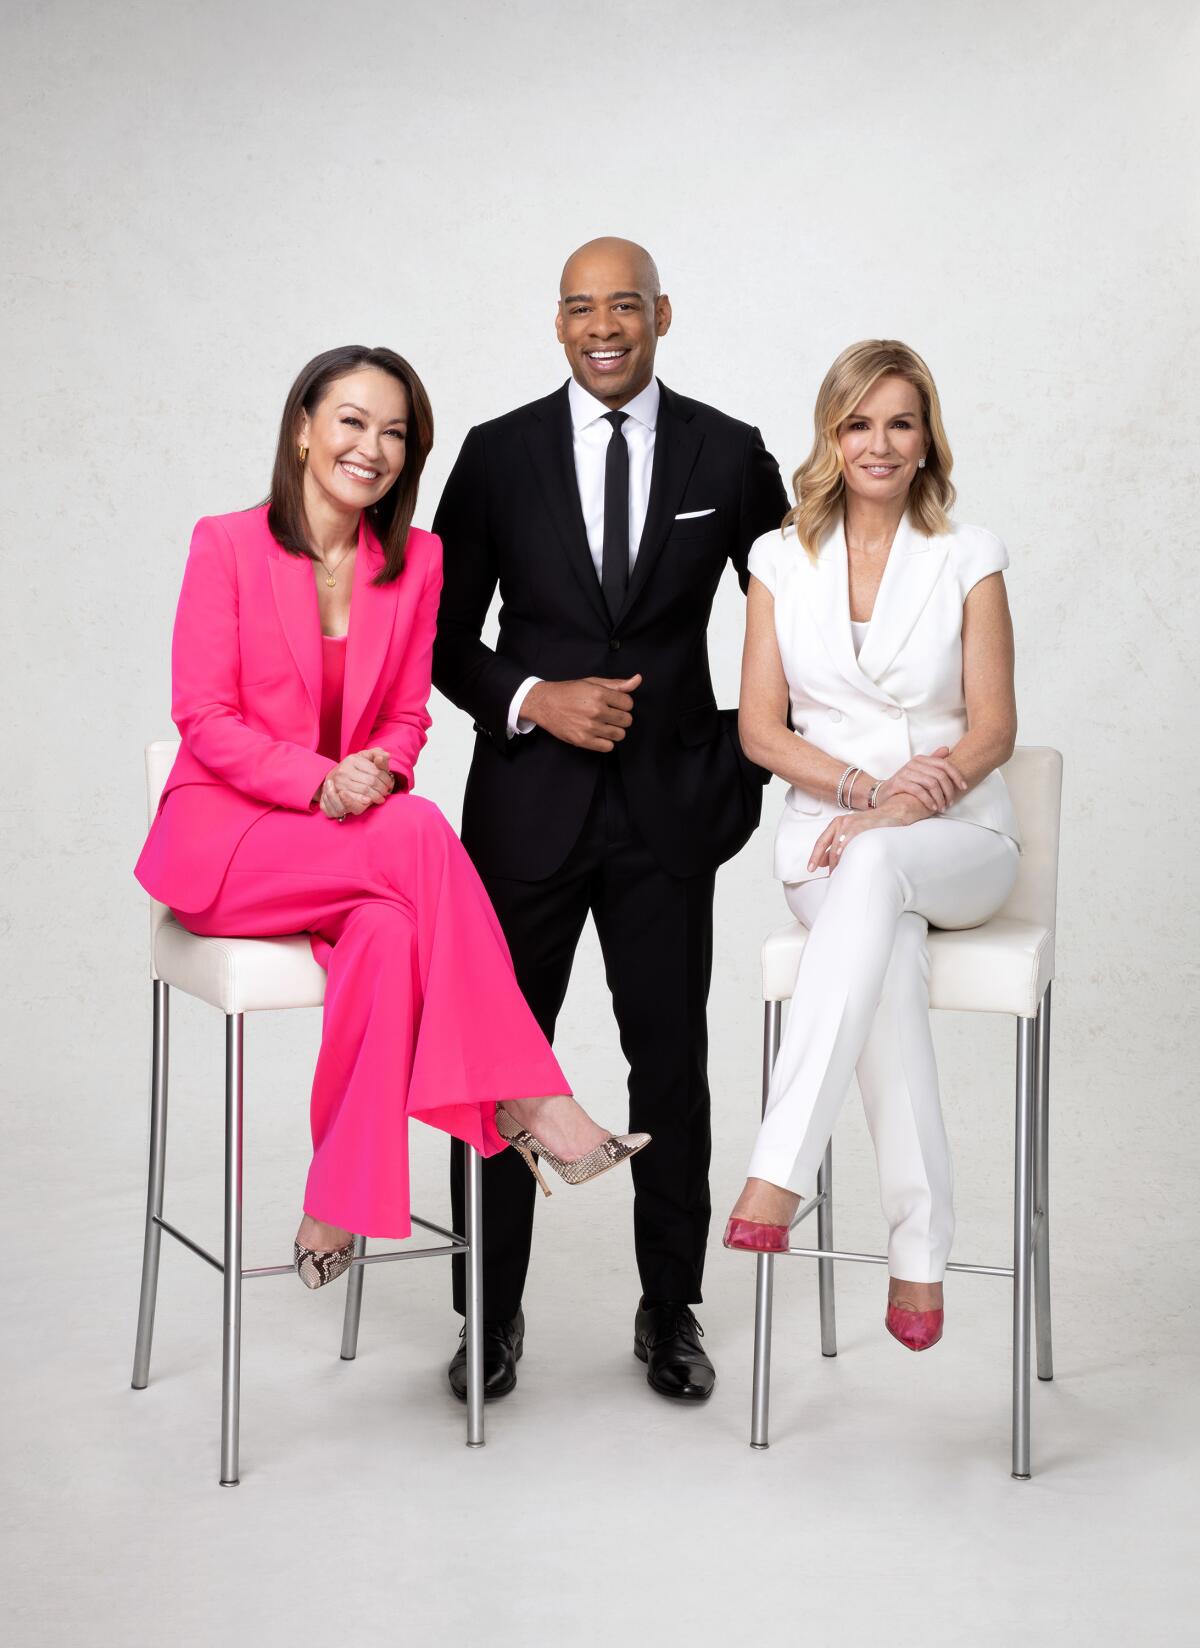 Amy Robach and TJ Holmes exit GMA3 after romance reveal